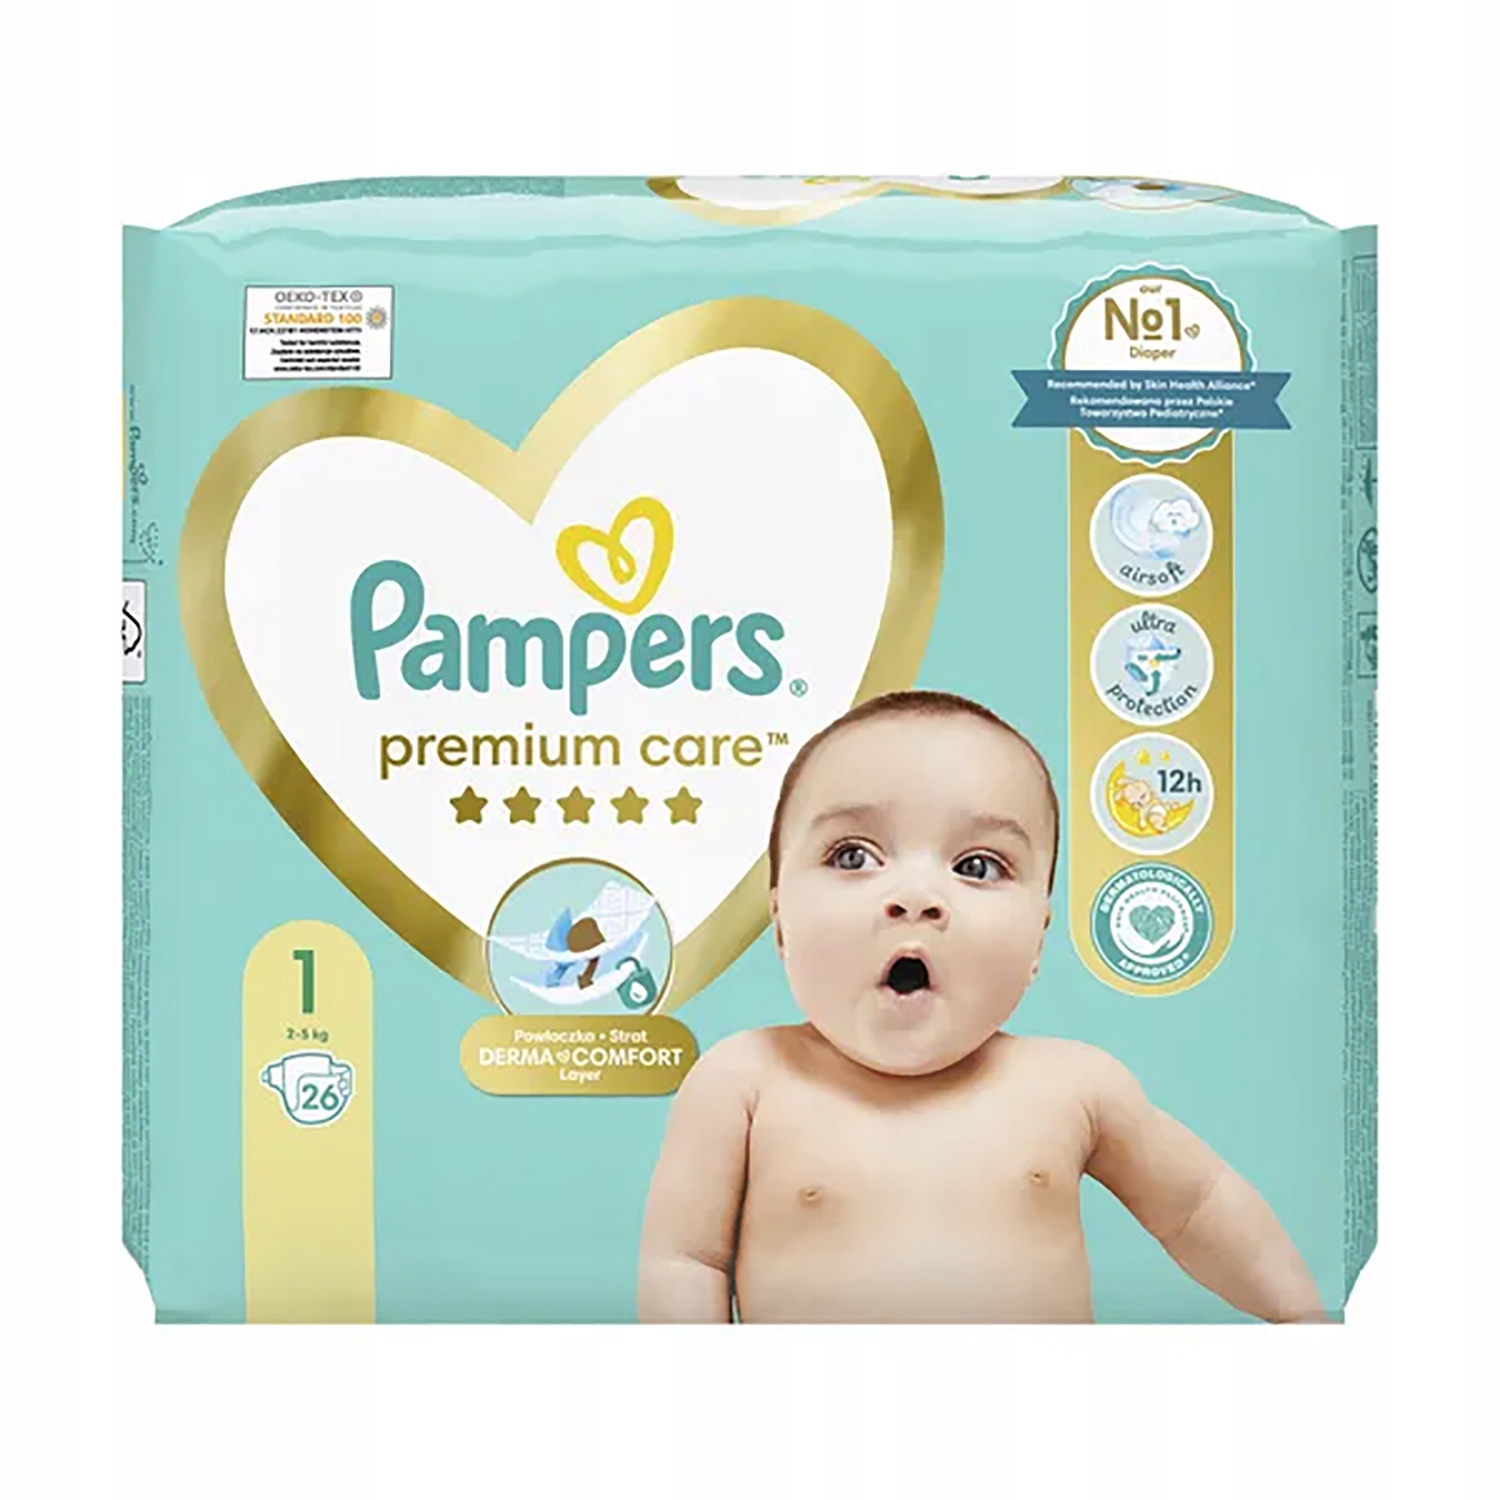 fedo pl pampers